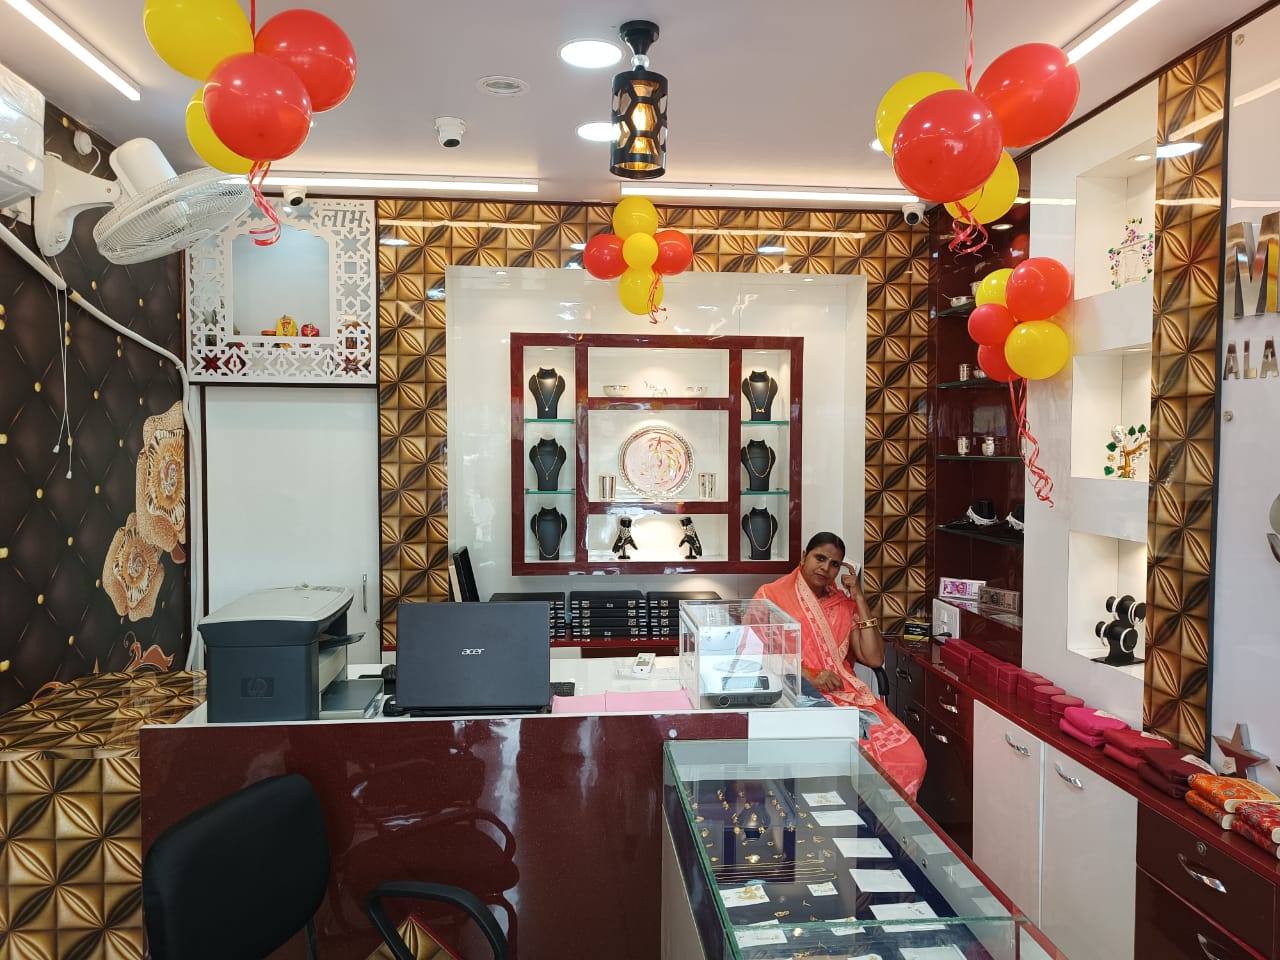 GEMS AND JEWELLERY SHOP NEAR SINGH MORE RANCHI